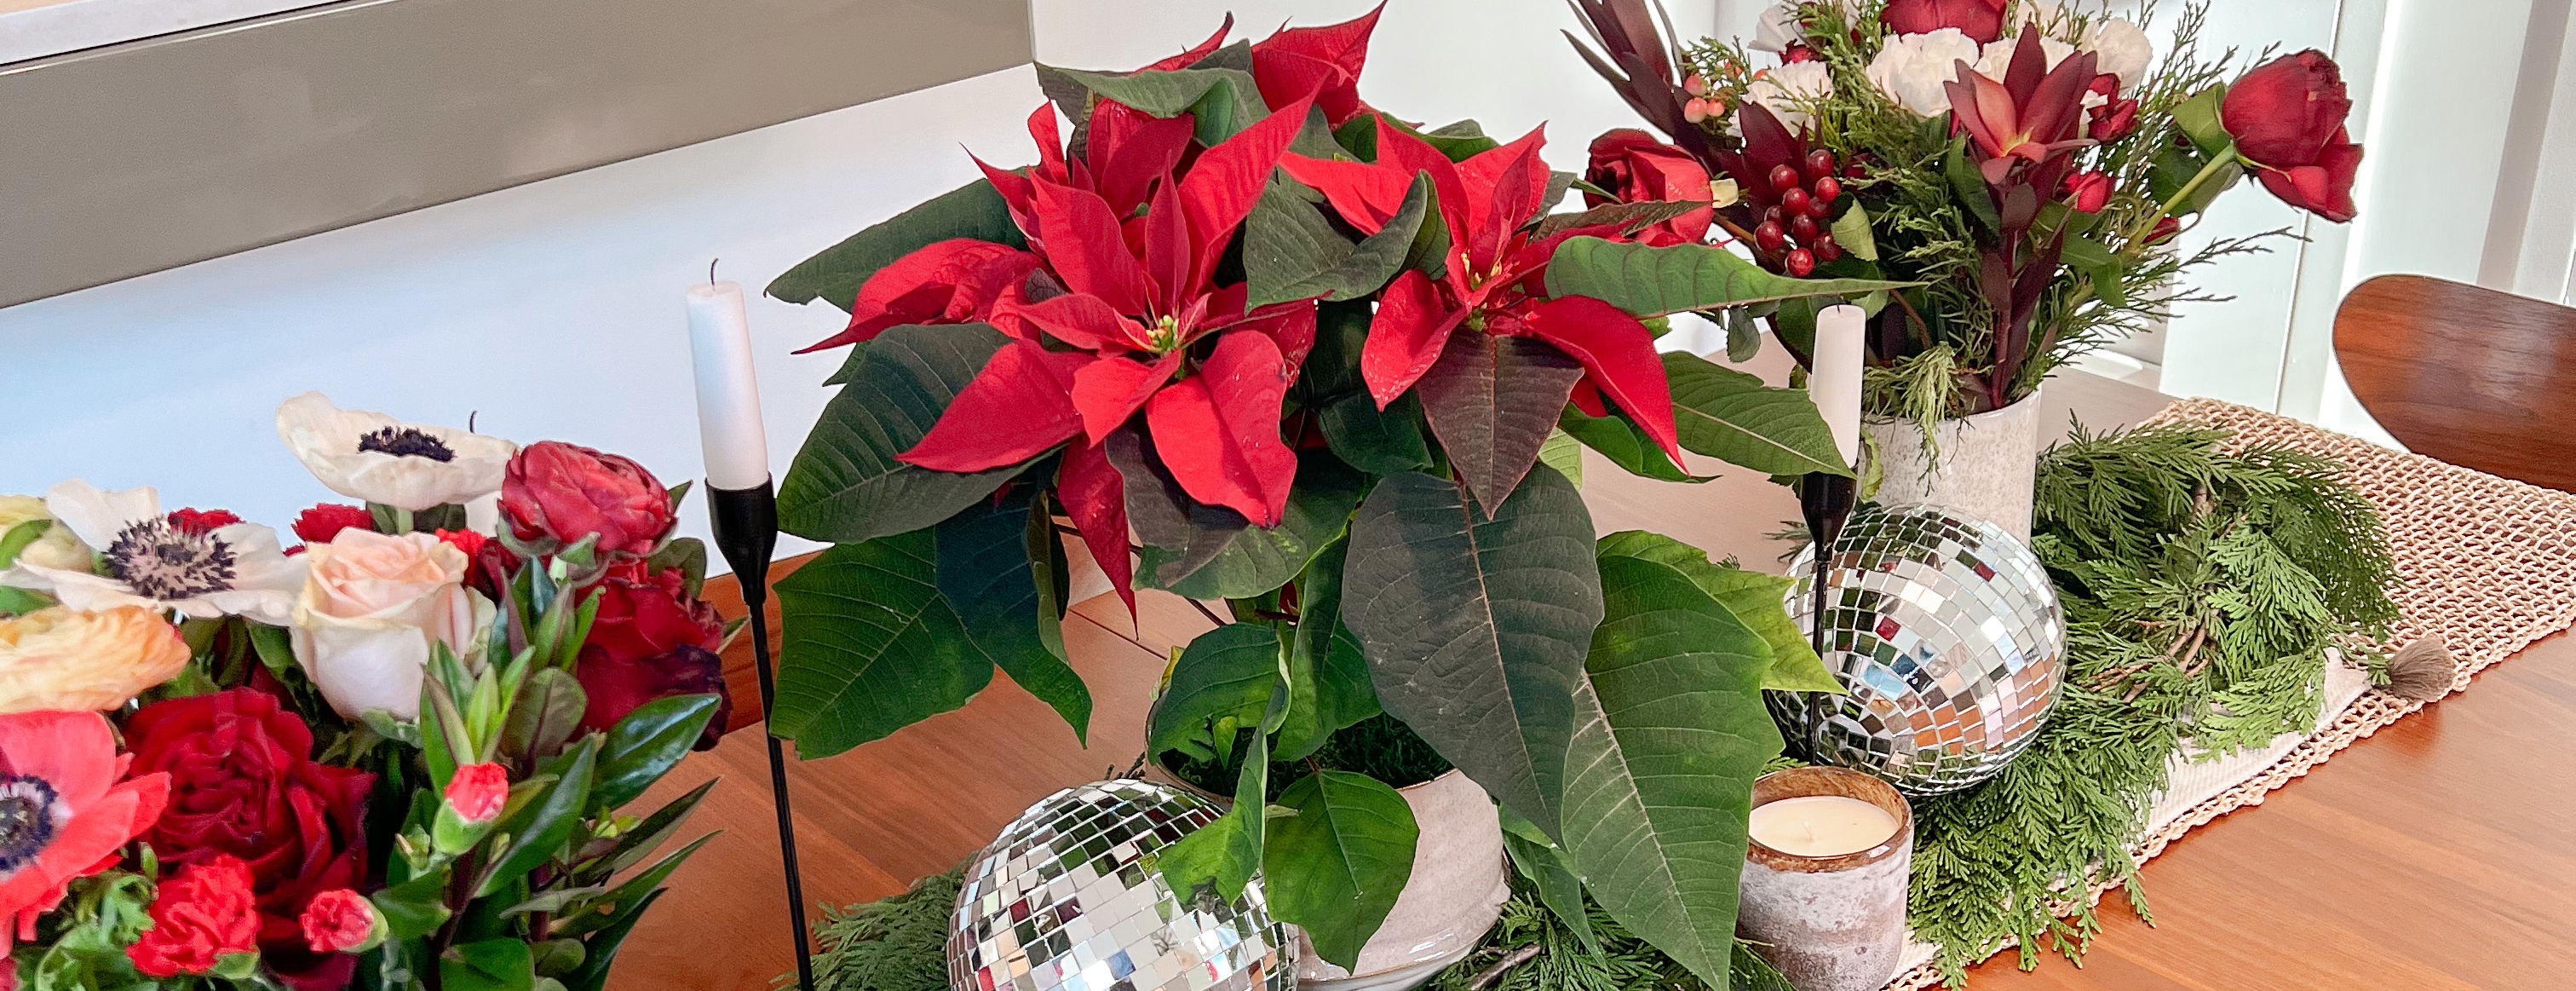 Table decorated with holiday centerpieces featuring poinsettia plants